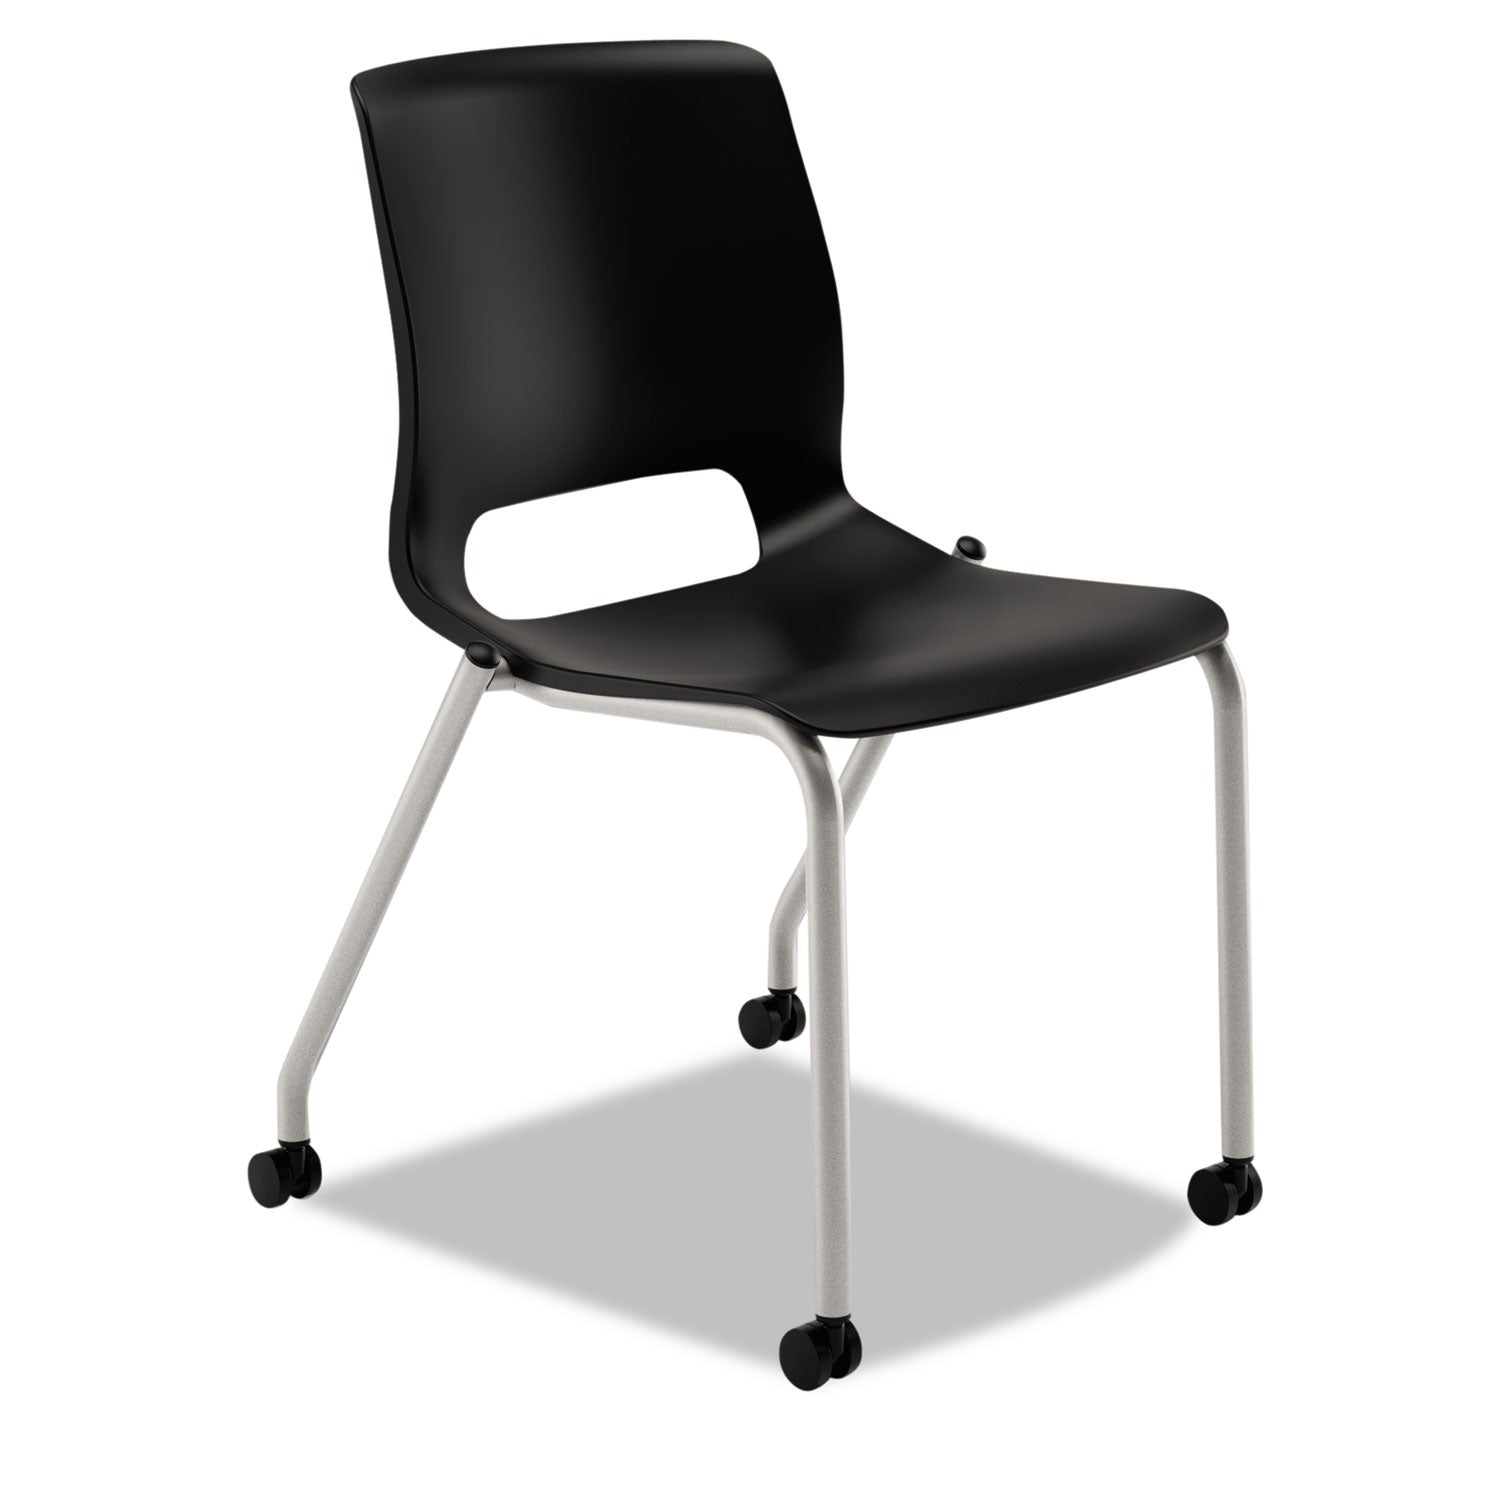 Motivate Four-Leg Stacking Chair with Plastic Seat, Supports 300 lb, 17.75" Seat Height, Onyx Seat/Back, Platinum Base, 2/CT - 